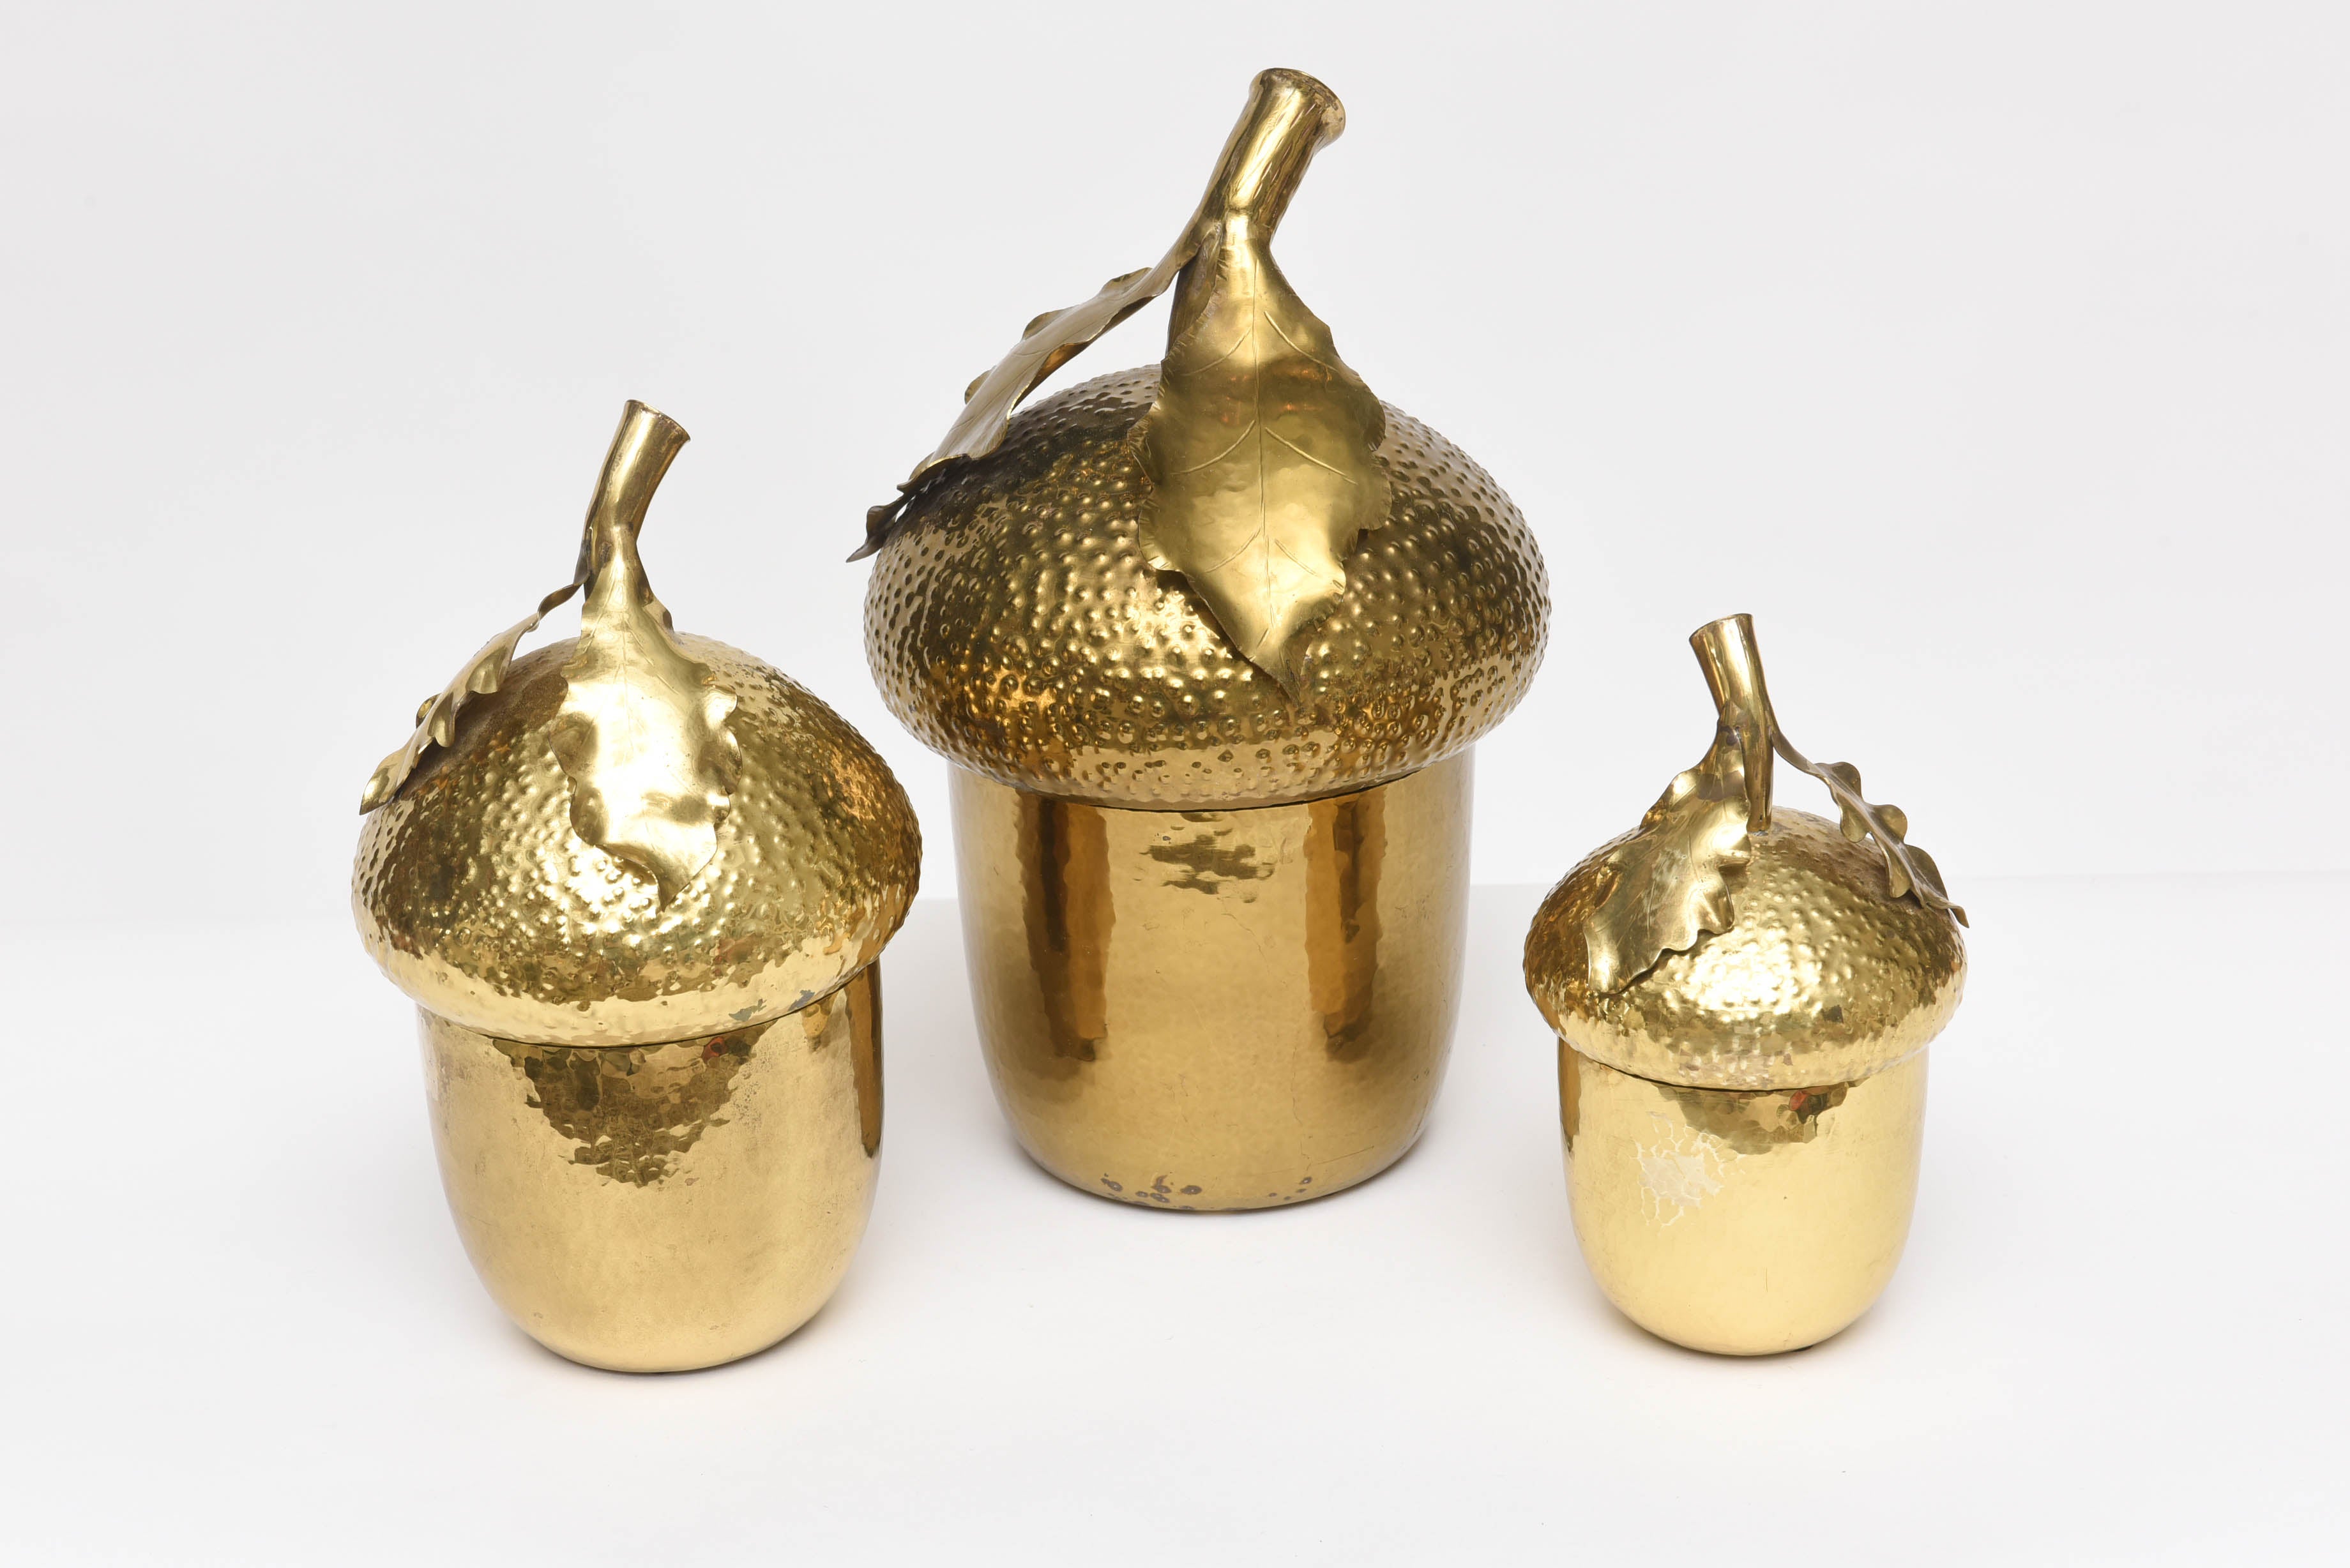 Nothing says fall quite like acorns! A very Fine set of hand-wrought brass acorn canisters, labeled 